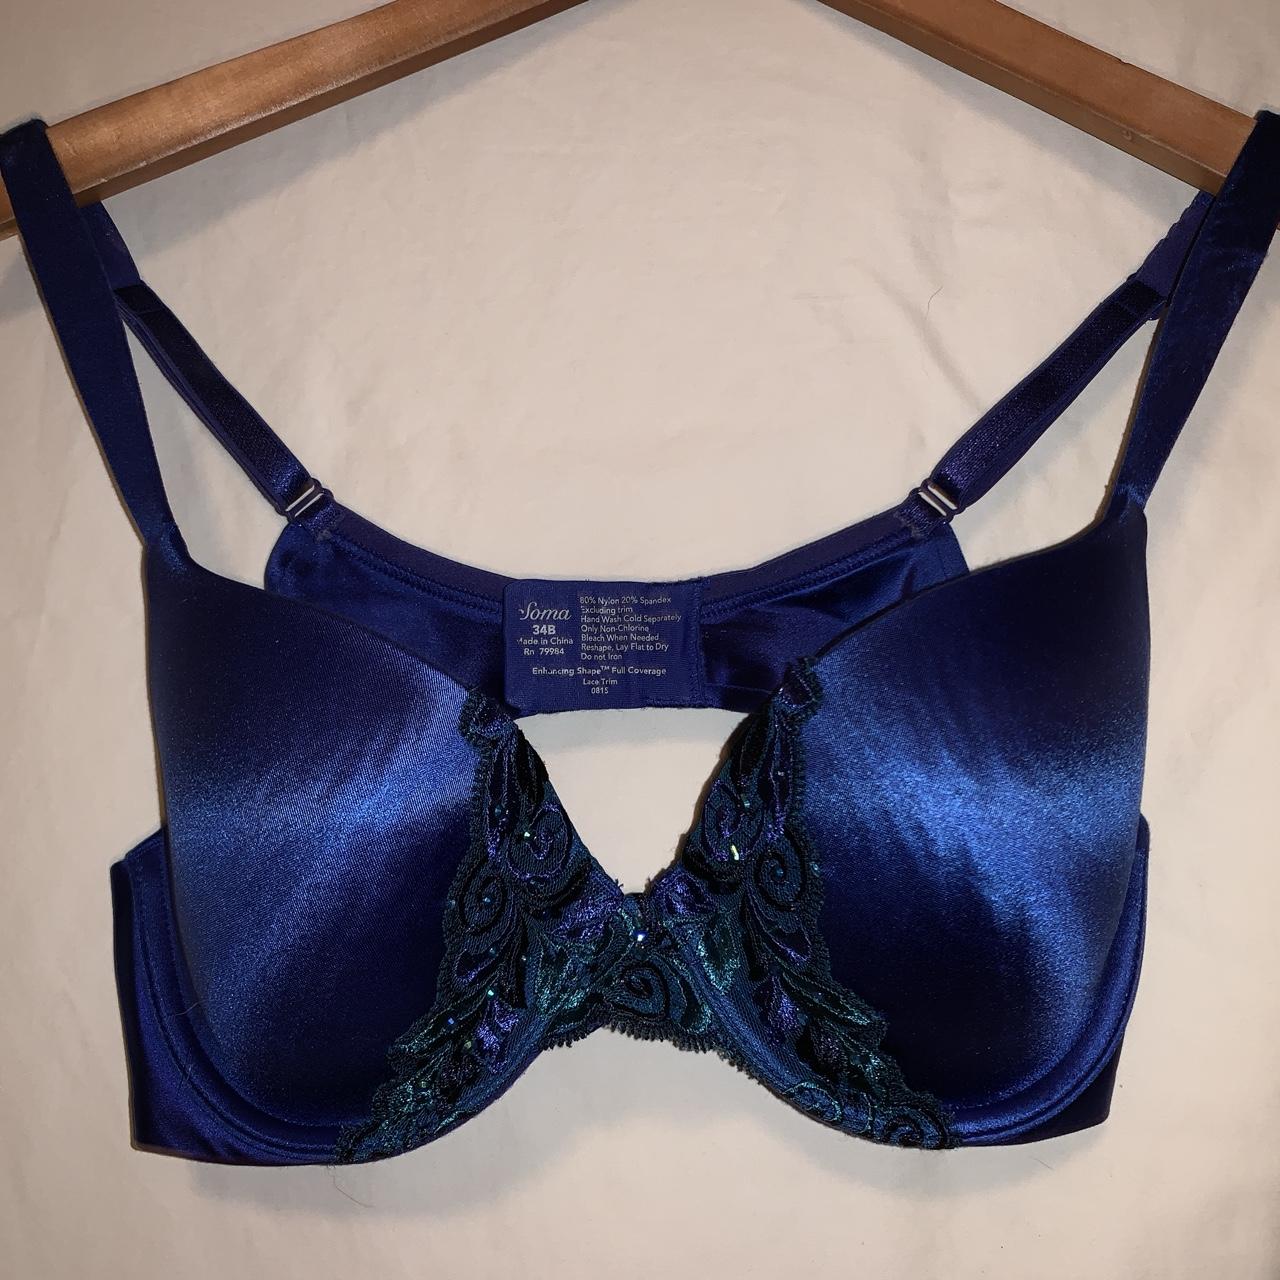 Soma 34B bra. Gorgeous royal blue color with peacock